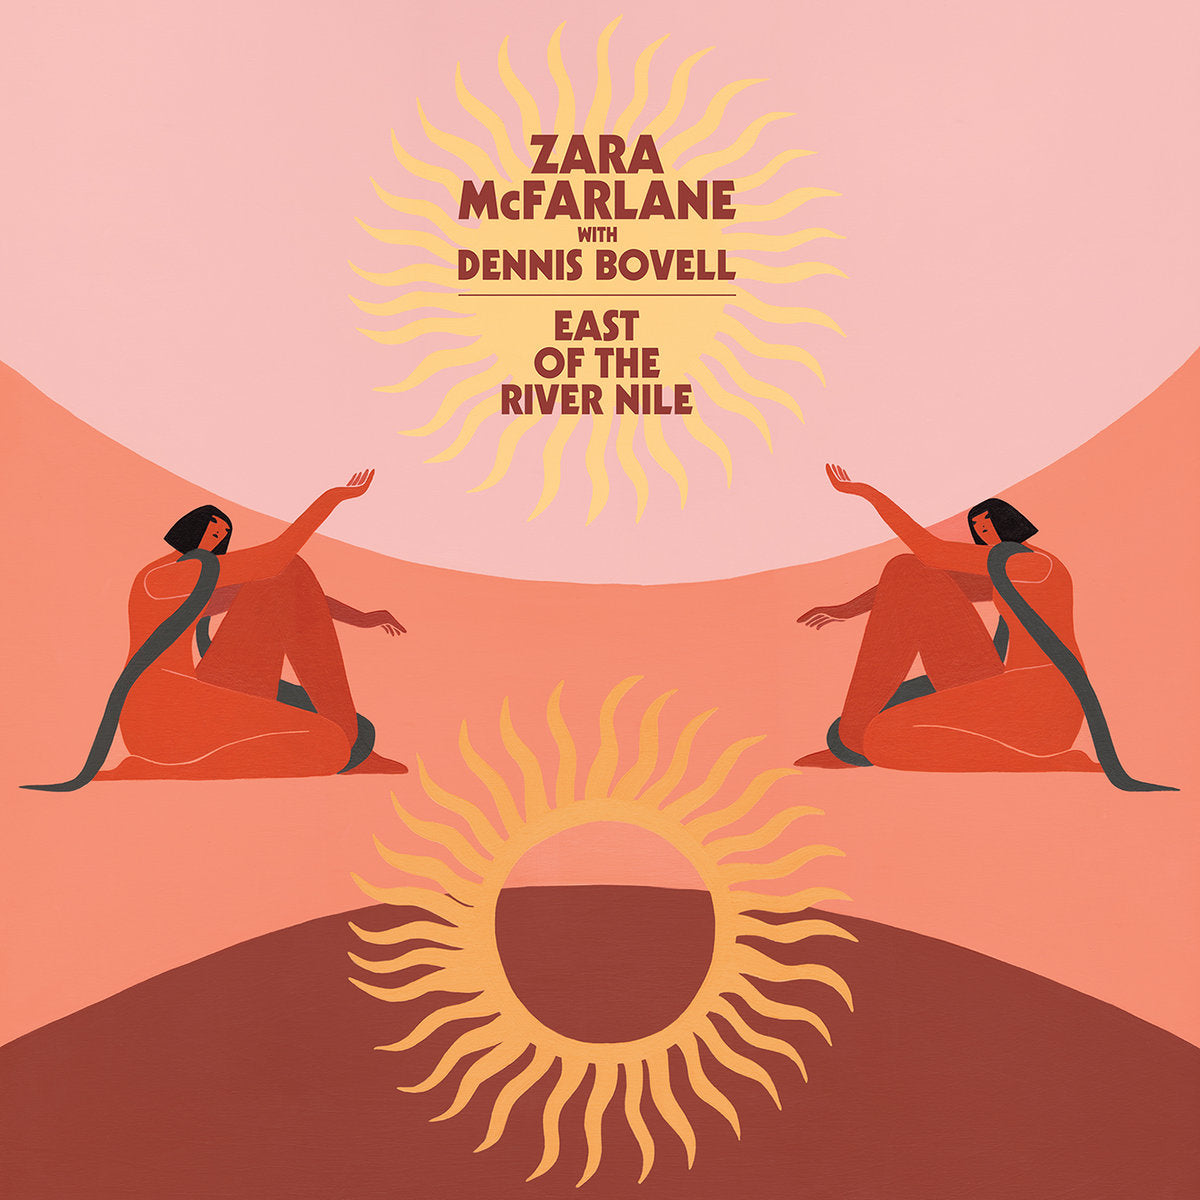 Zara McFarlane with Dennis Dovell - East of the River Nile LP